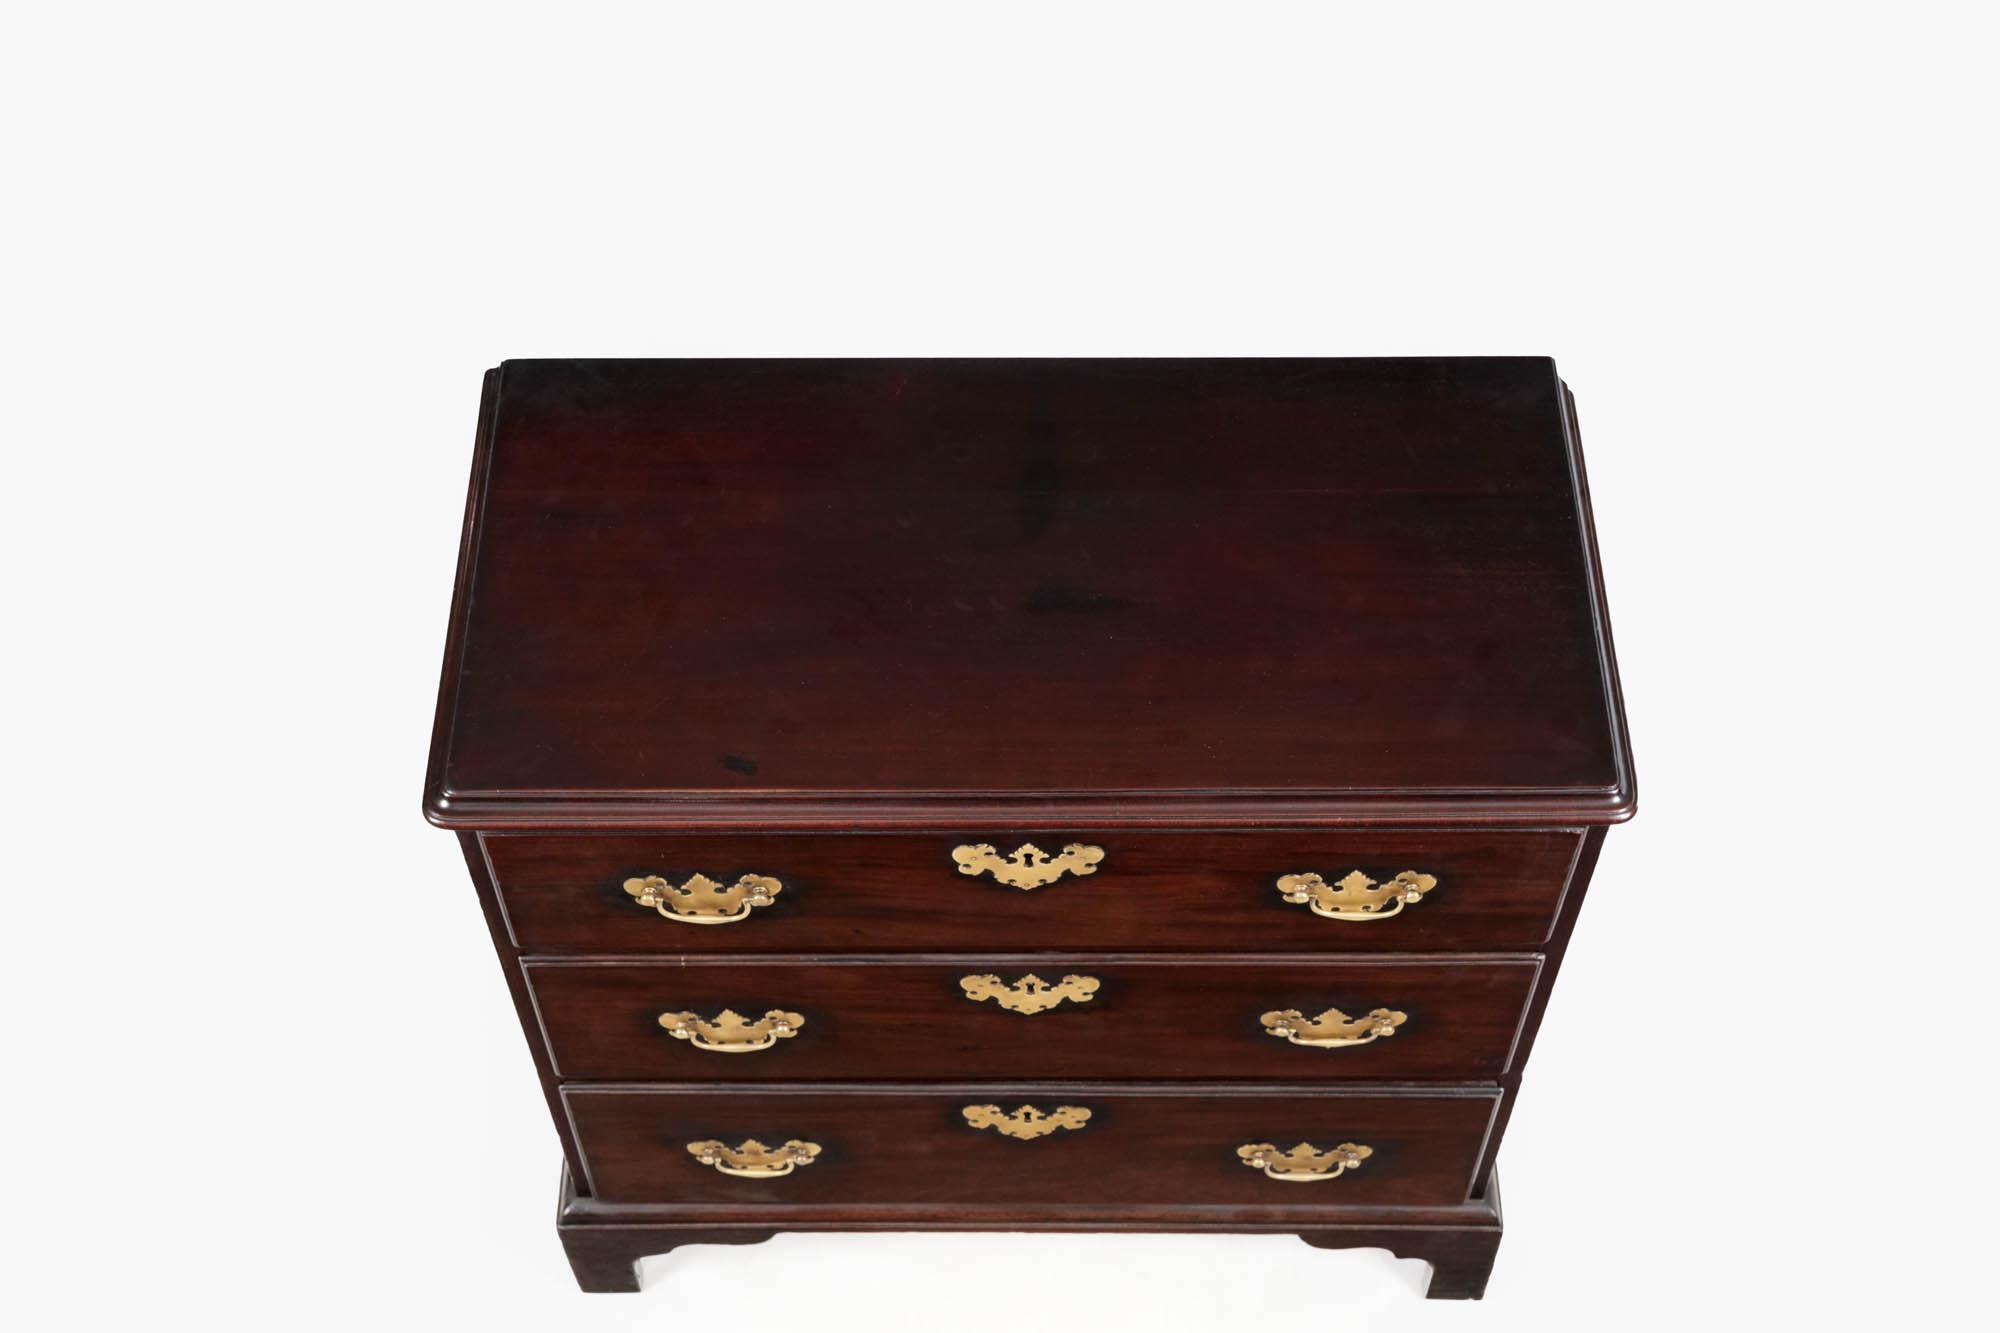 A very fine George III three-drawer bachelor's chest. This piece sits on simple ogee bracket feet and the drawers are complete with brass pulls and escutcheons.